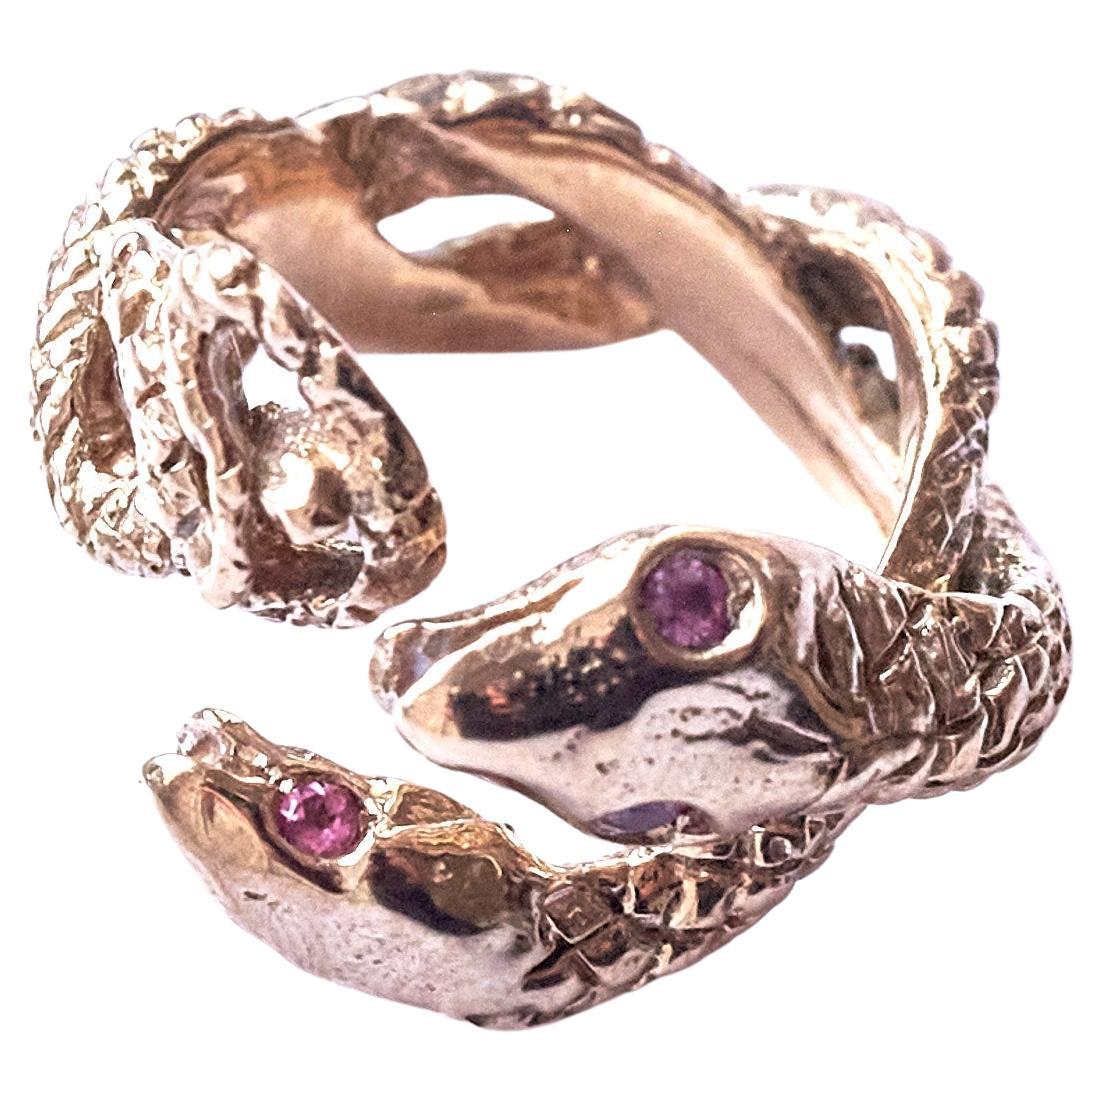 Animal jewelry 4 pcs Pink Sapphire Snake Ring Bronze  
By J Dauphin
Cocktail Ring

This ring is adjustable - fits size 6-8

J DAUPHIN 